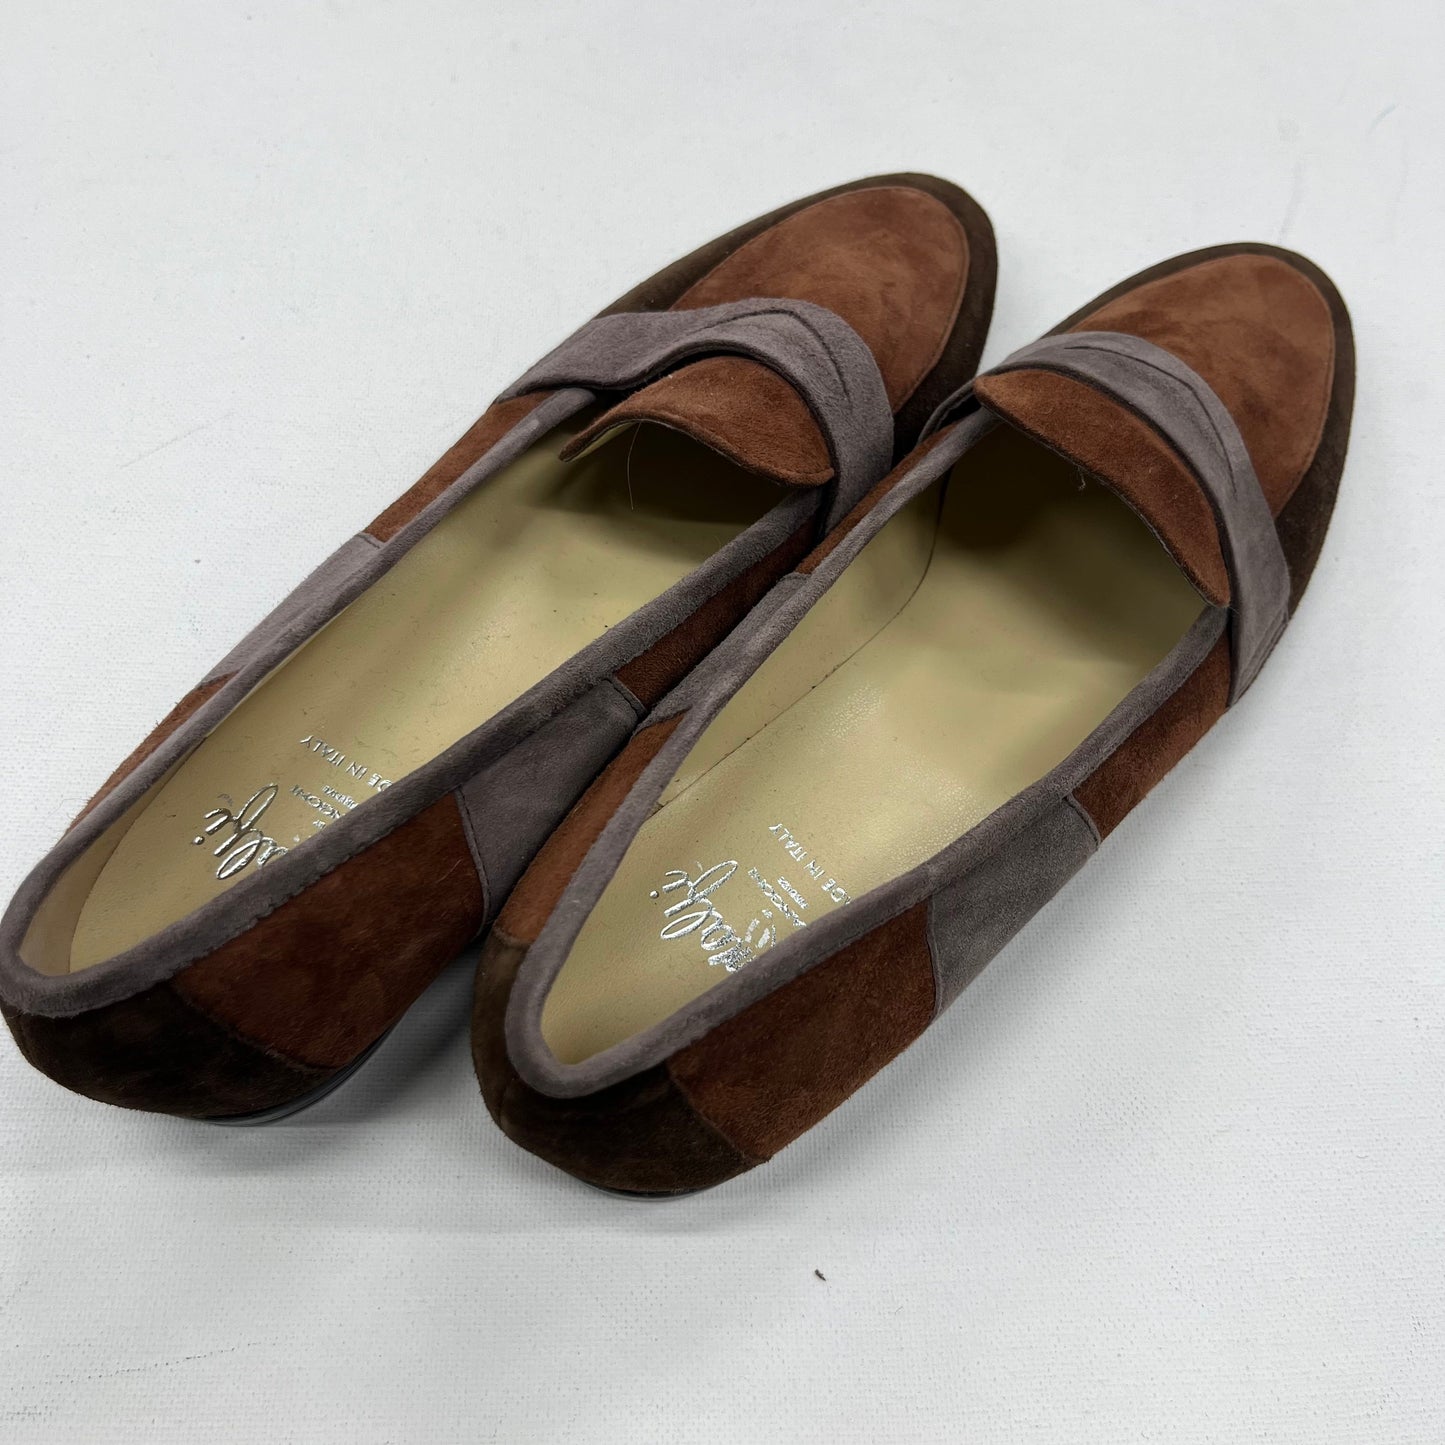 Shoes Flats Loafer Oxford By Amalfi  Size: 8